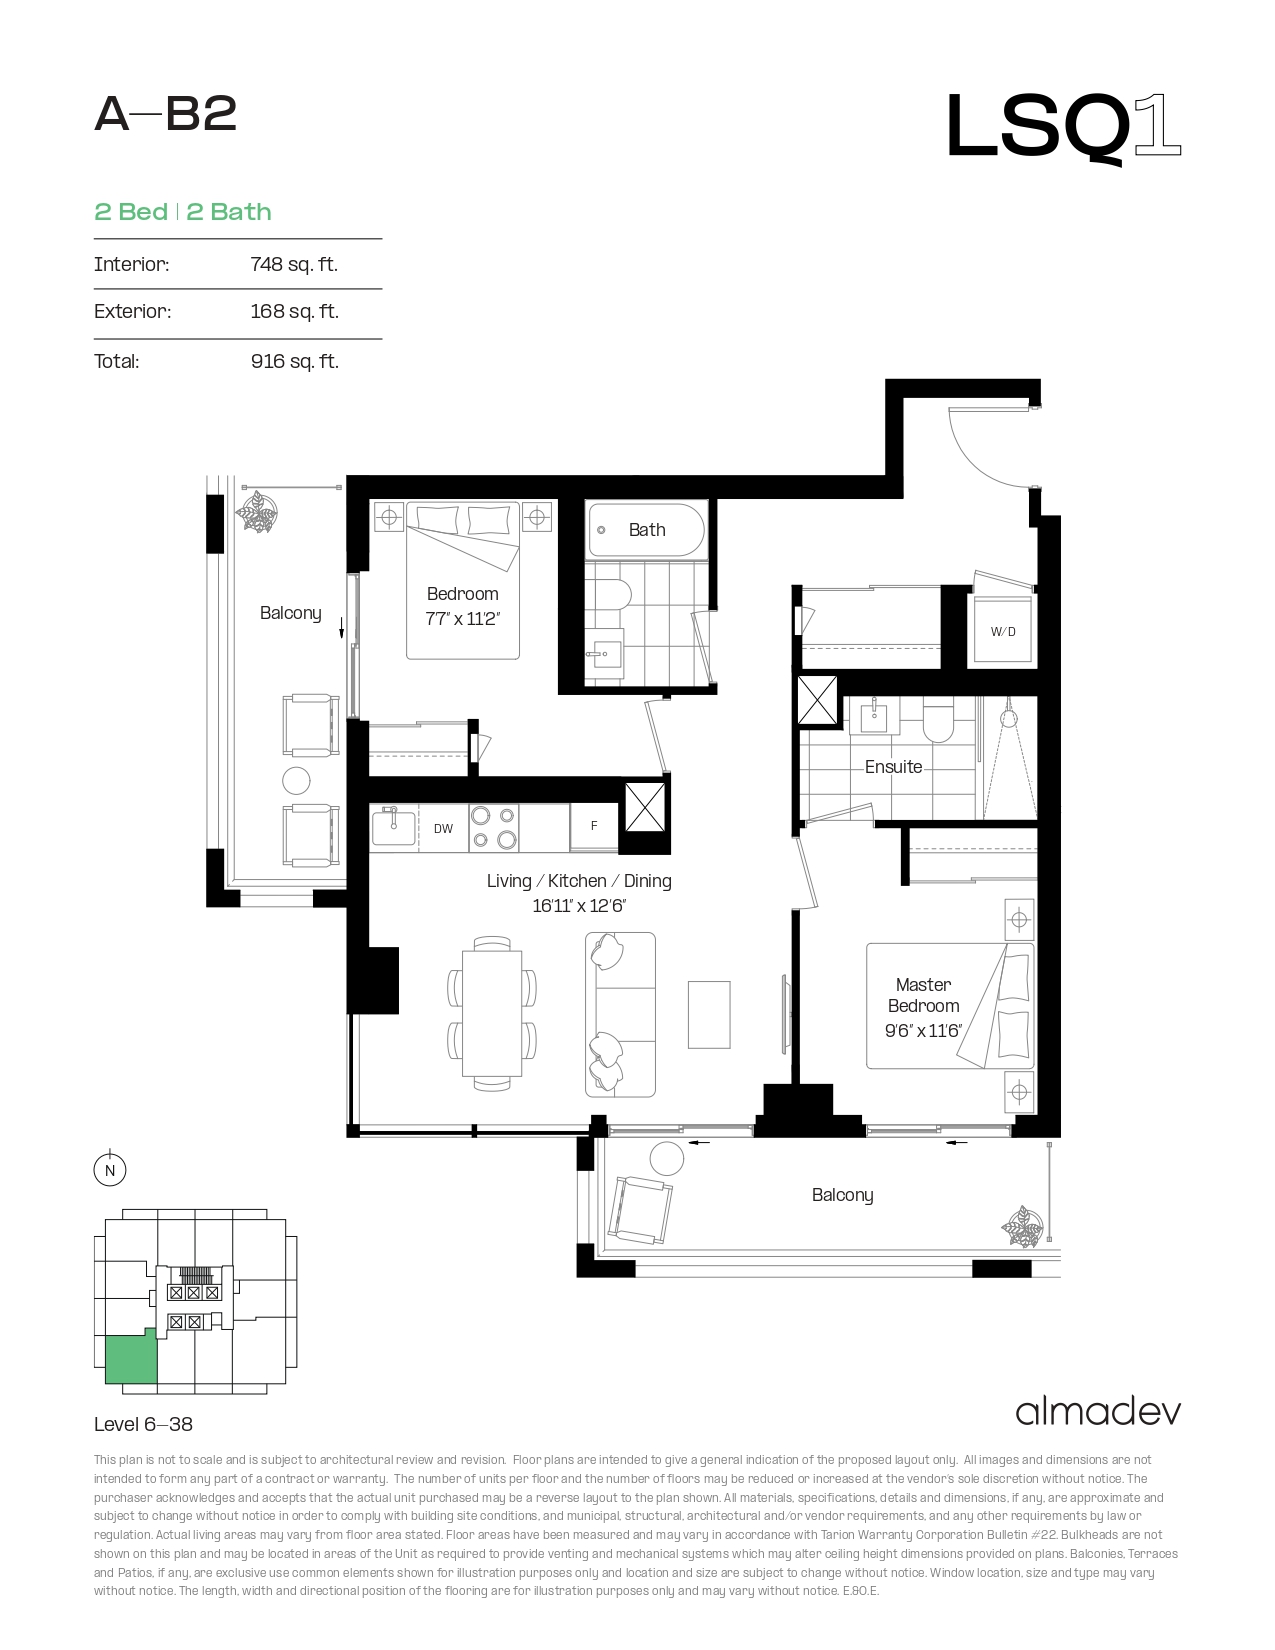 A-B2 Floor Plan of LSQ Condos with undefined beds